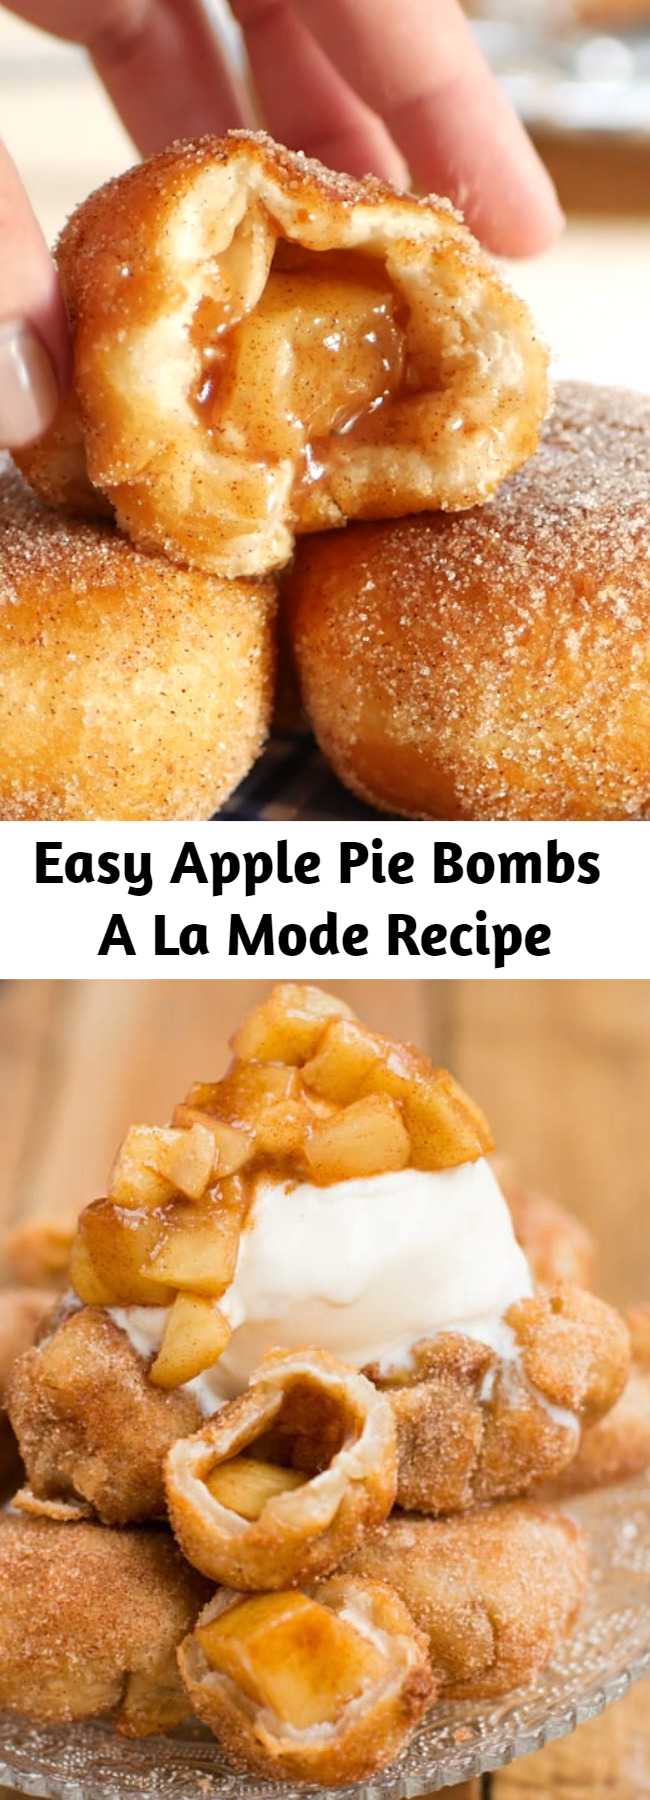 Easy Apple Pie Bombs A La Mode Recipe - It's not fall until you've made apple pie bombs a la mode with creamy vanilla ice cream and those glazed apples all over the tops. I love fall dessert recipes!